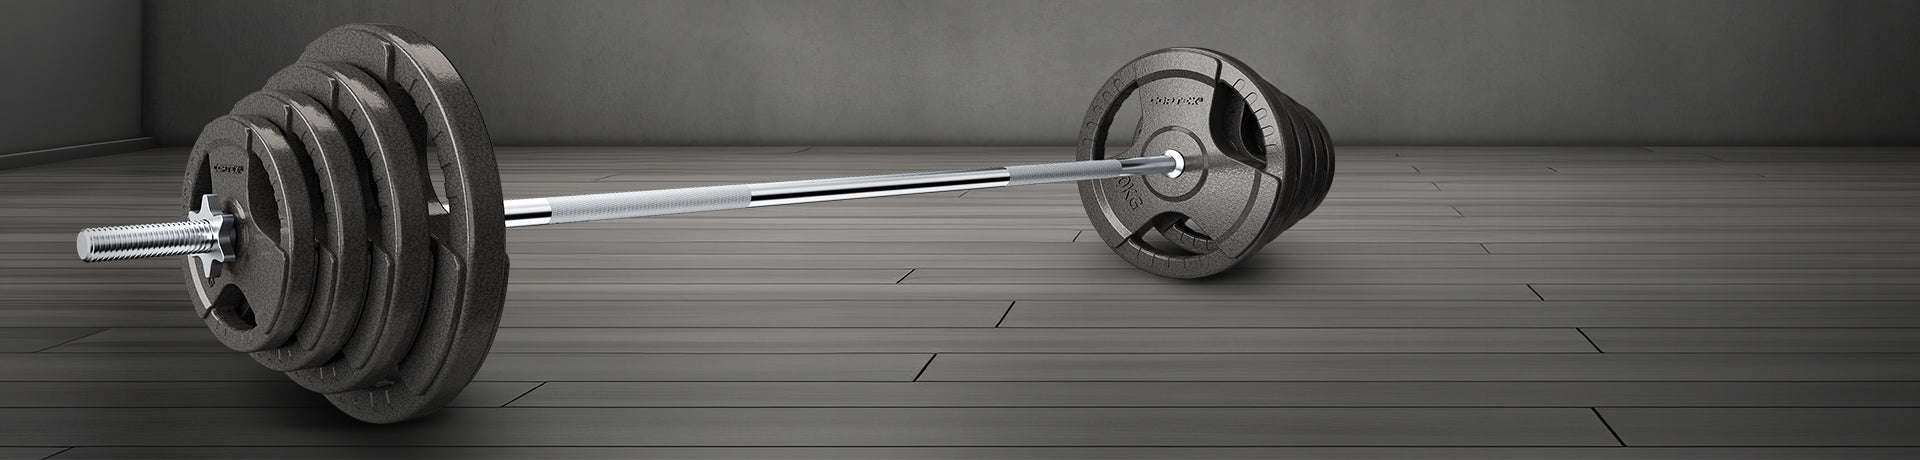 Standard Weight Plate & Barbell Packages